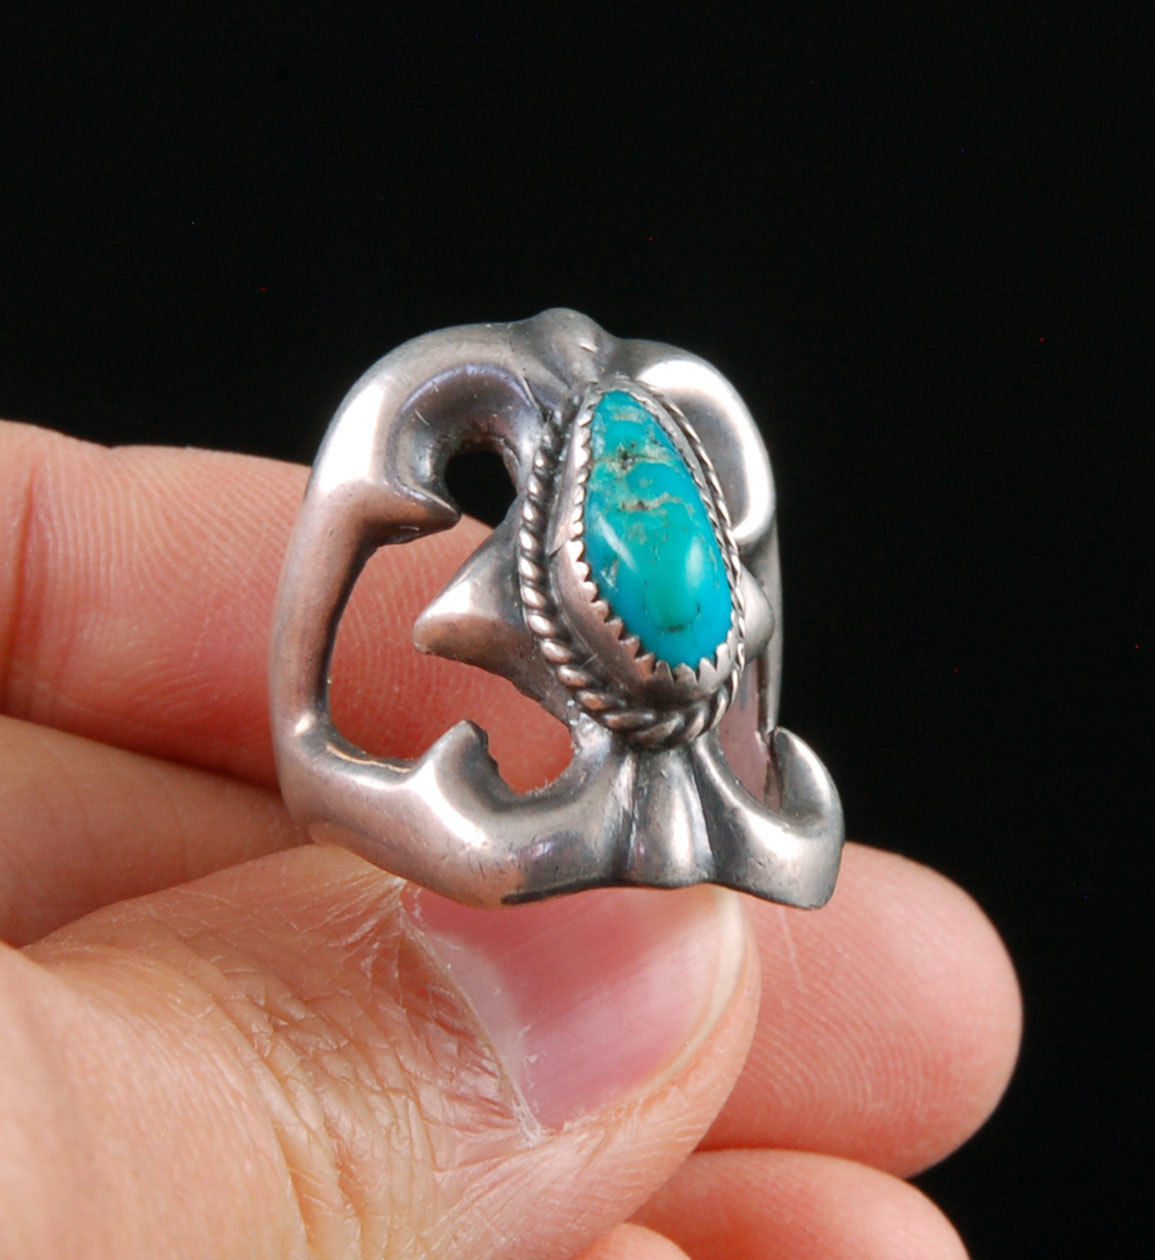 Sandcast Sterling Silver ring with Stabilized Kingman Turquoise from Arizona